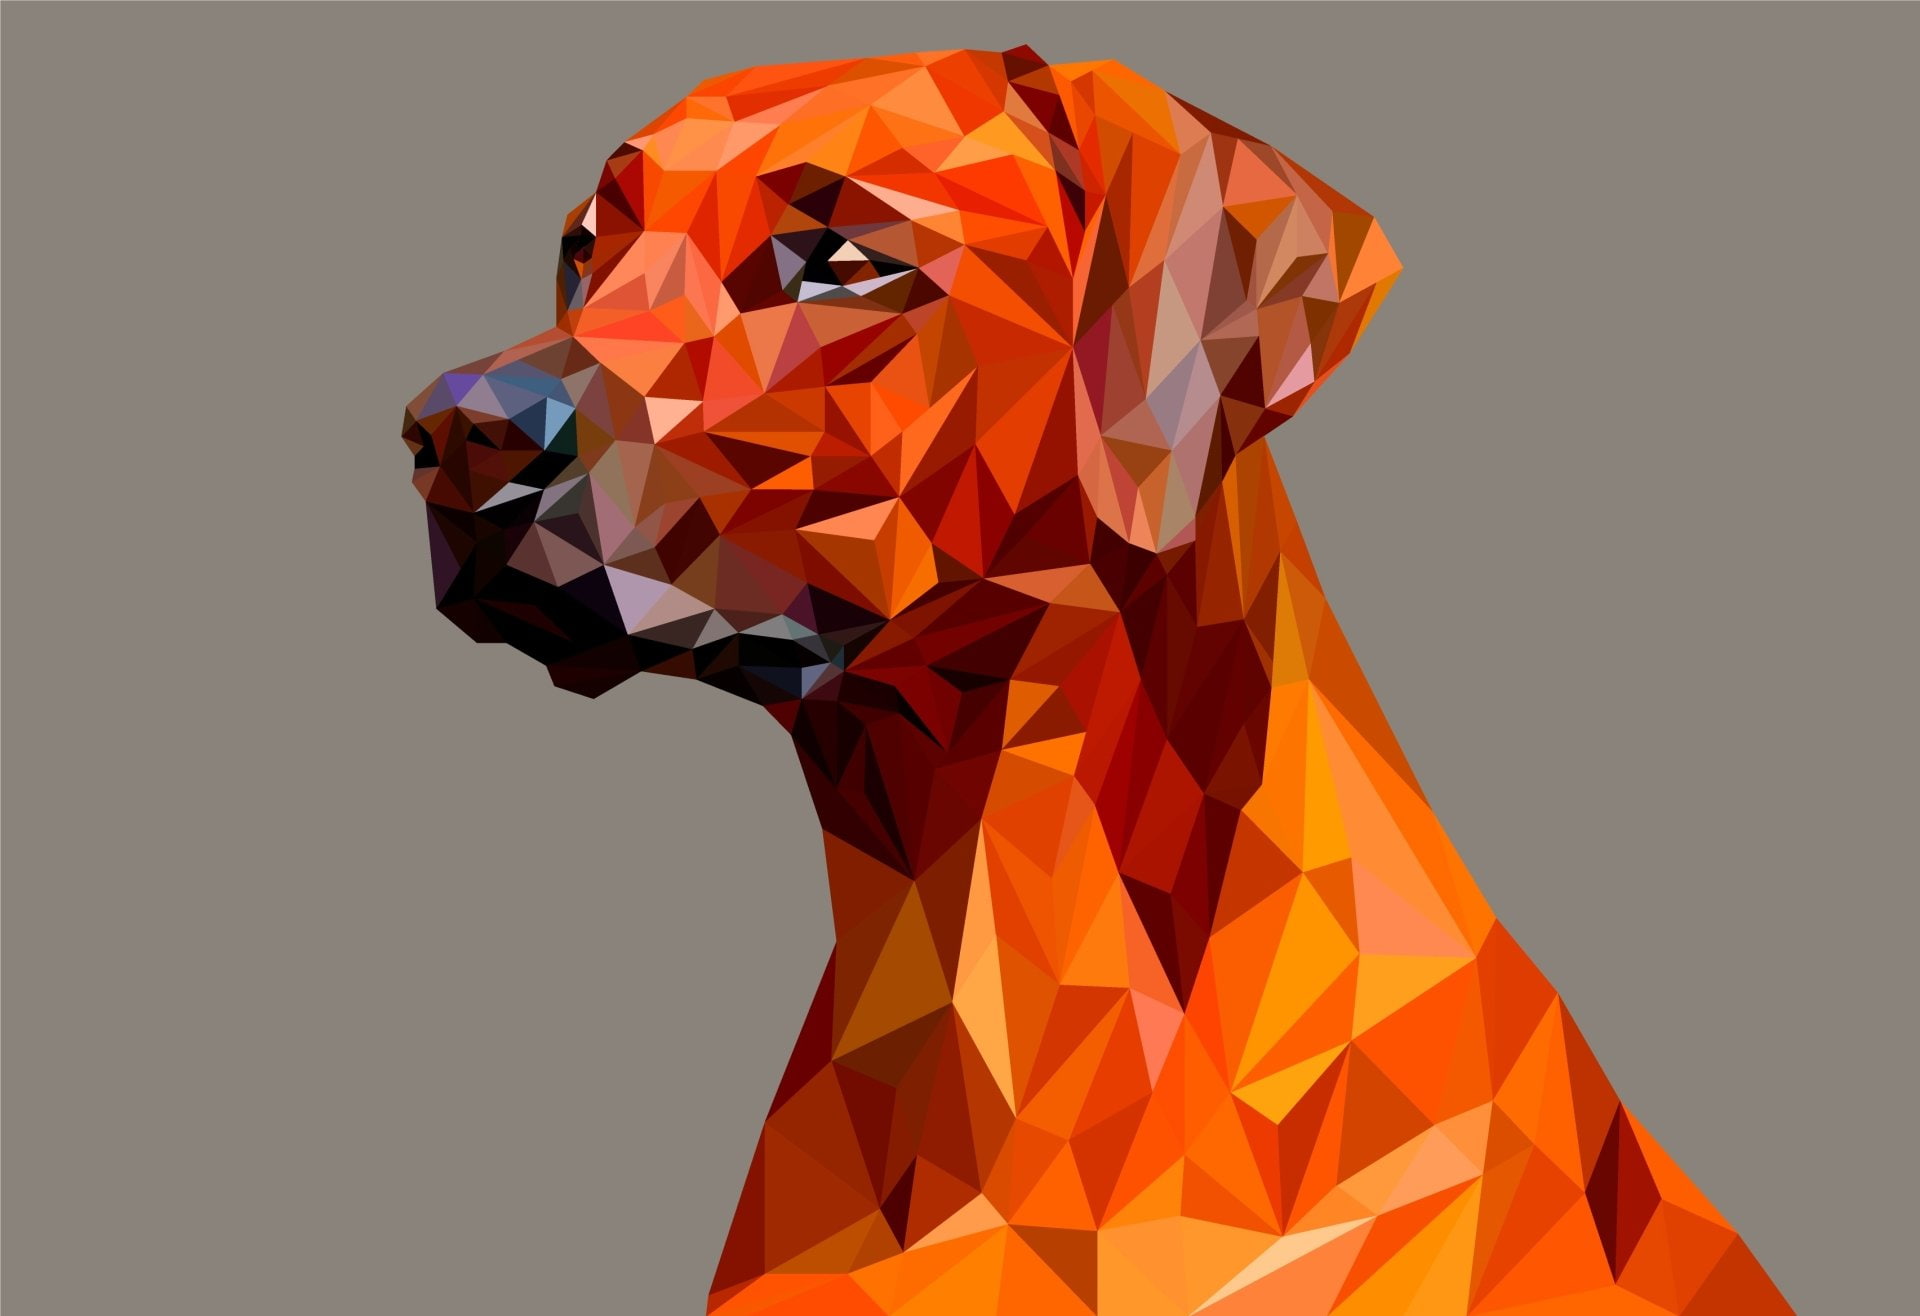 Abstract, Facets, Artistic, Digital Art, Dog, Low Poly, Polygon